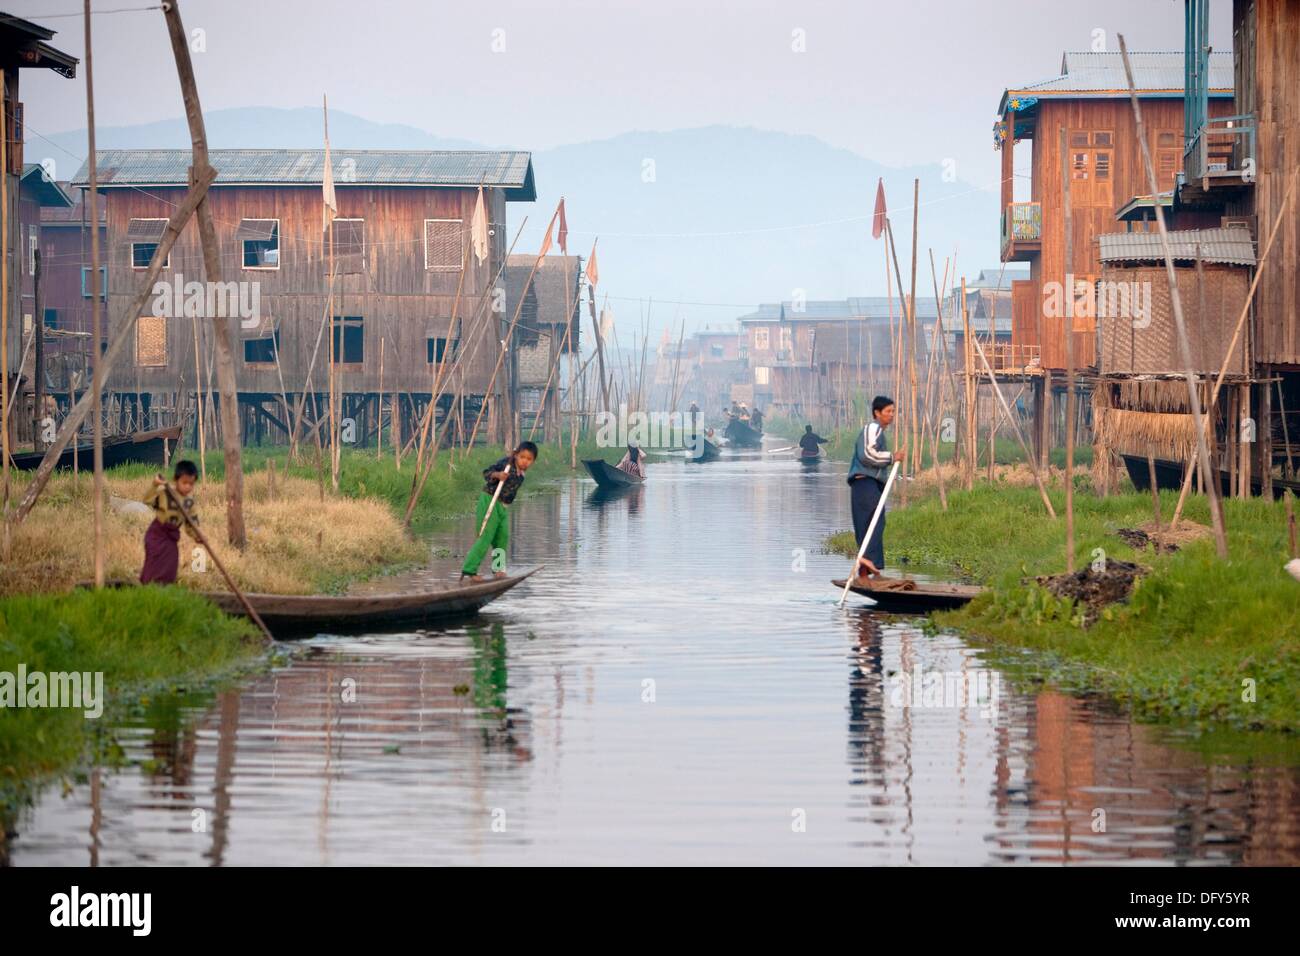 Life stile in one of the villages along Inle Lake. Stock Photo